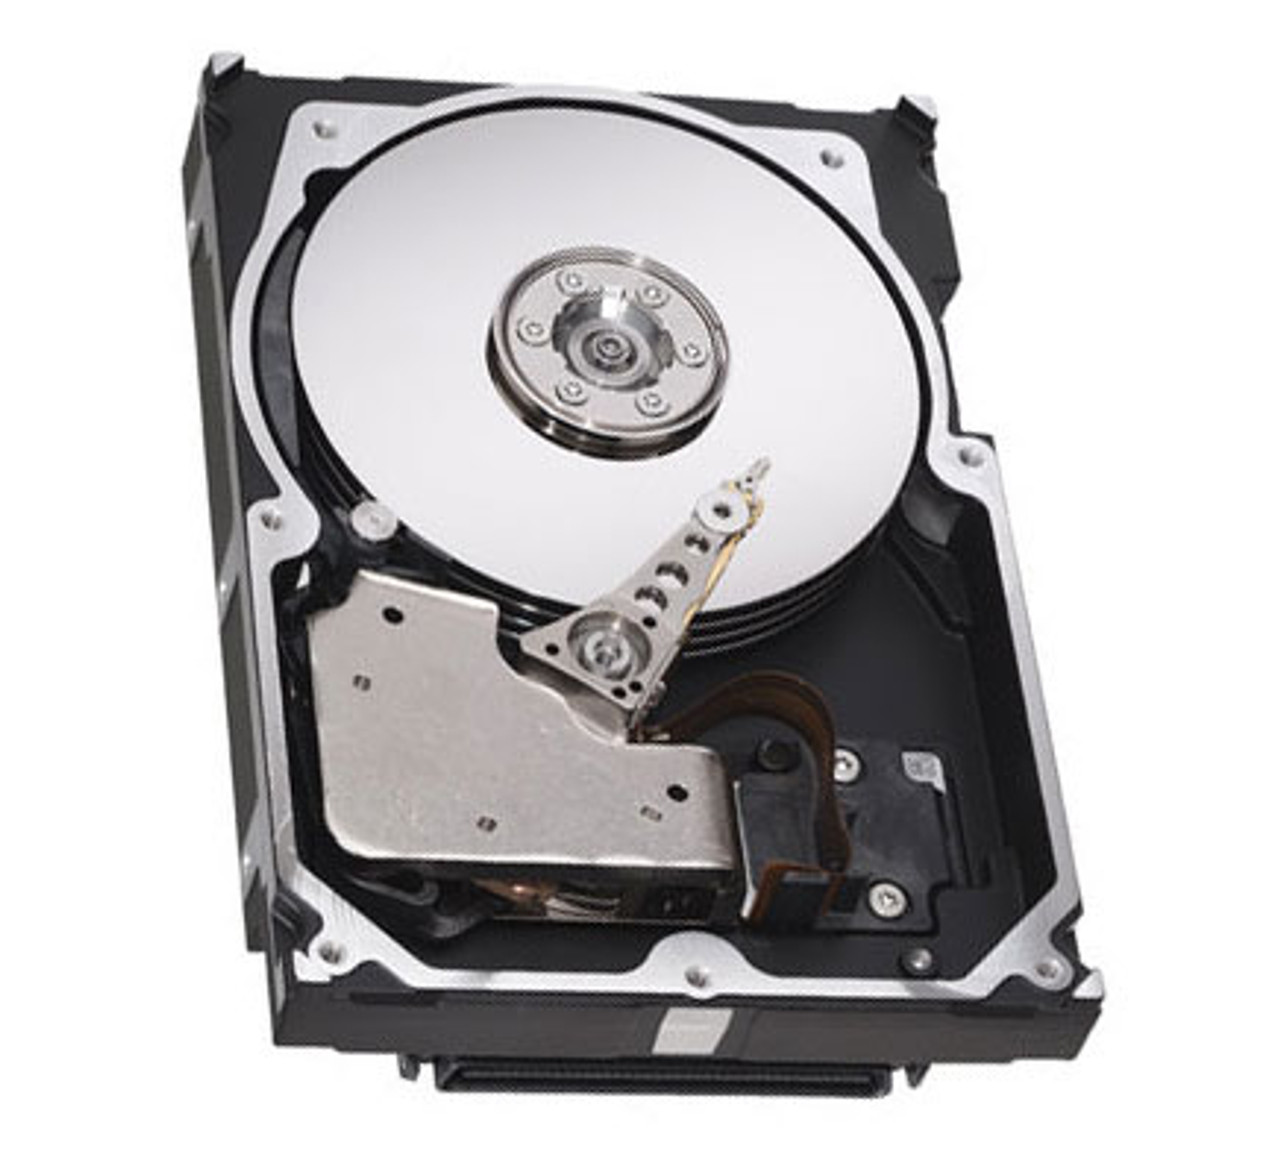 0R619 Dell 73GB 10000RPM Ultra-320 SCSI 80-Pin Hot Swap 3.5-inch Internal Hard Drive with Tray